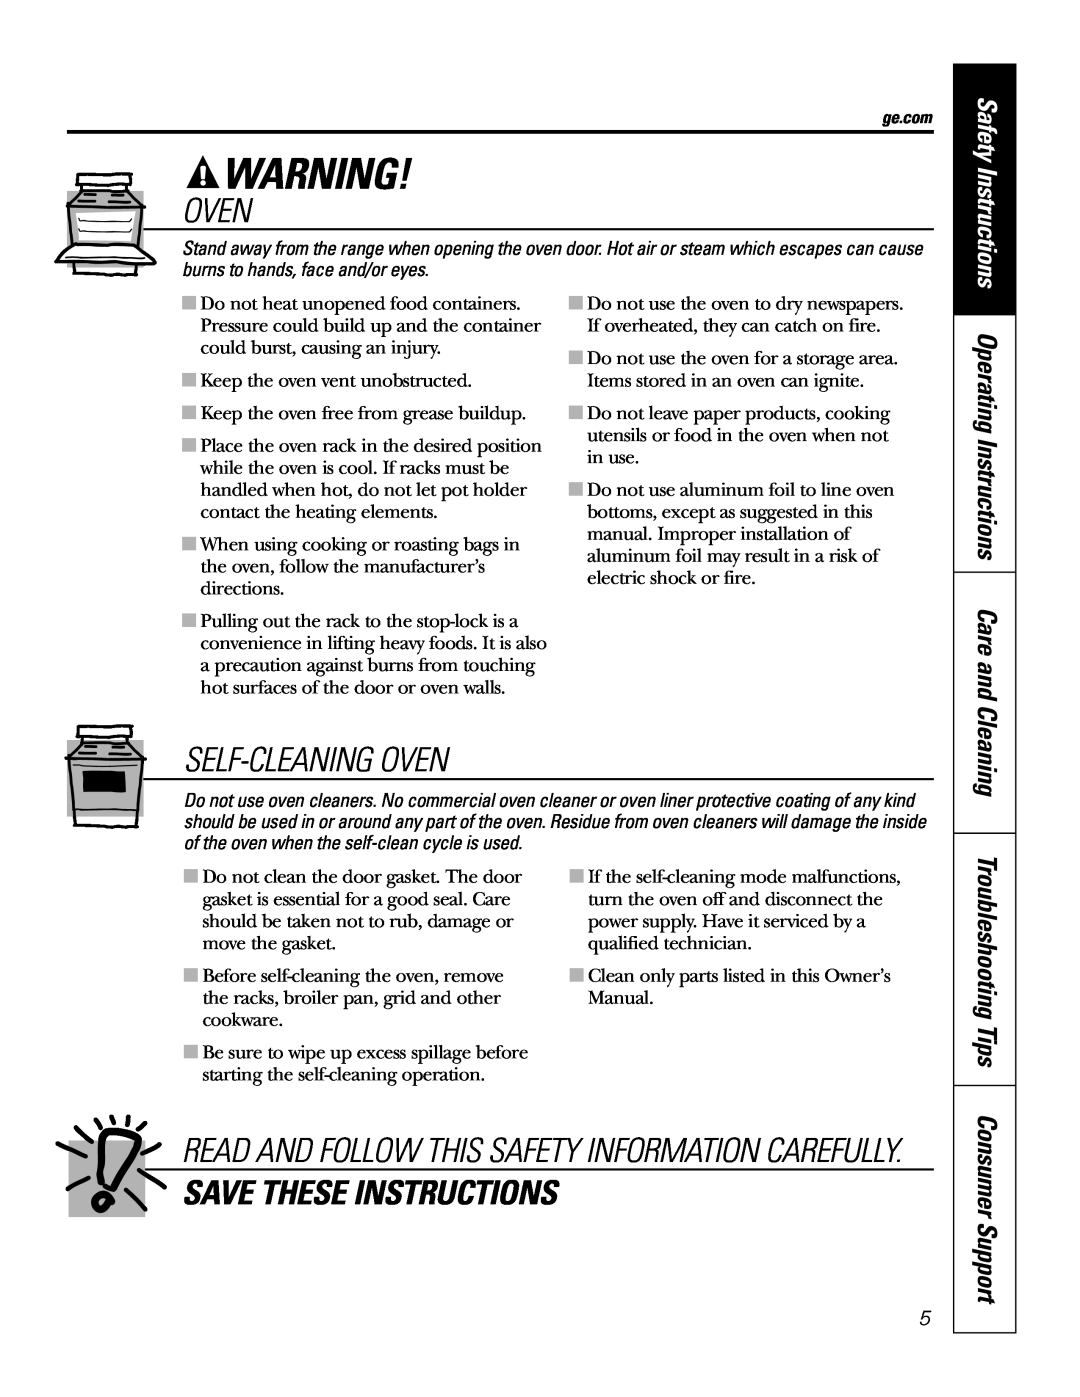 GE JSP46 owner manual Self-Cleaning Oven, Save These Instructions, OperatingInstructions Care and, Troubleshooting Tips 